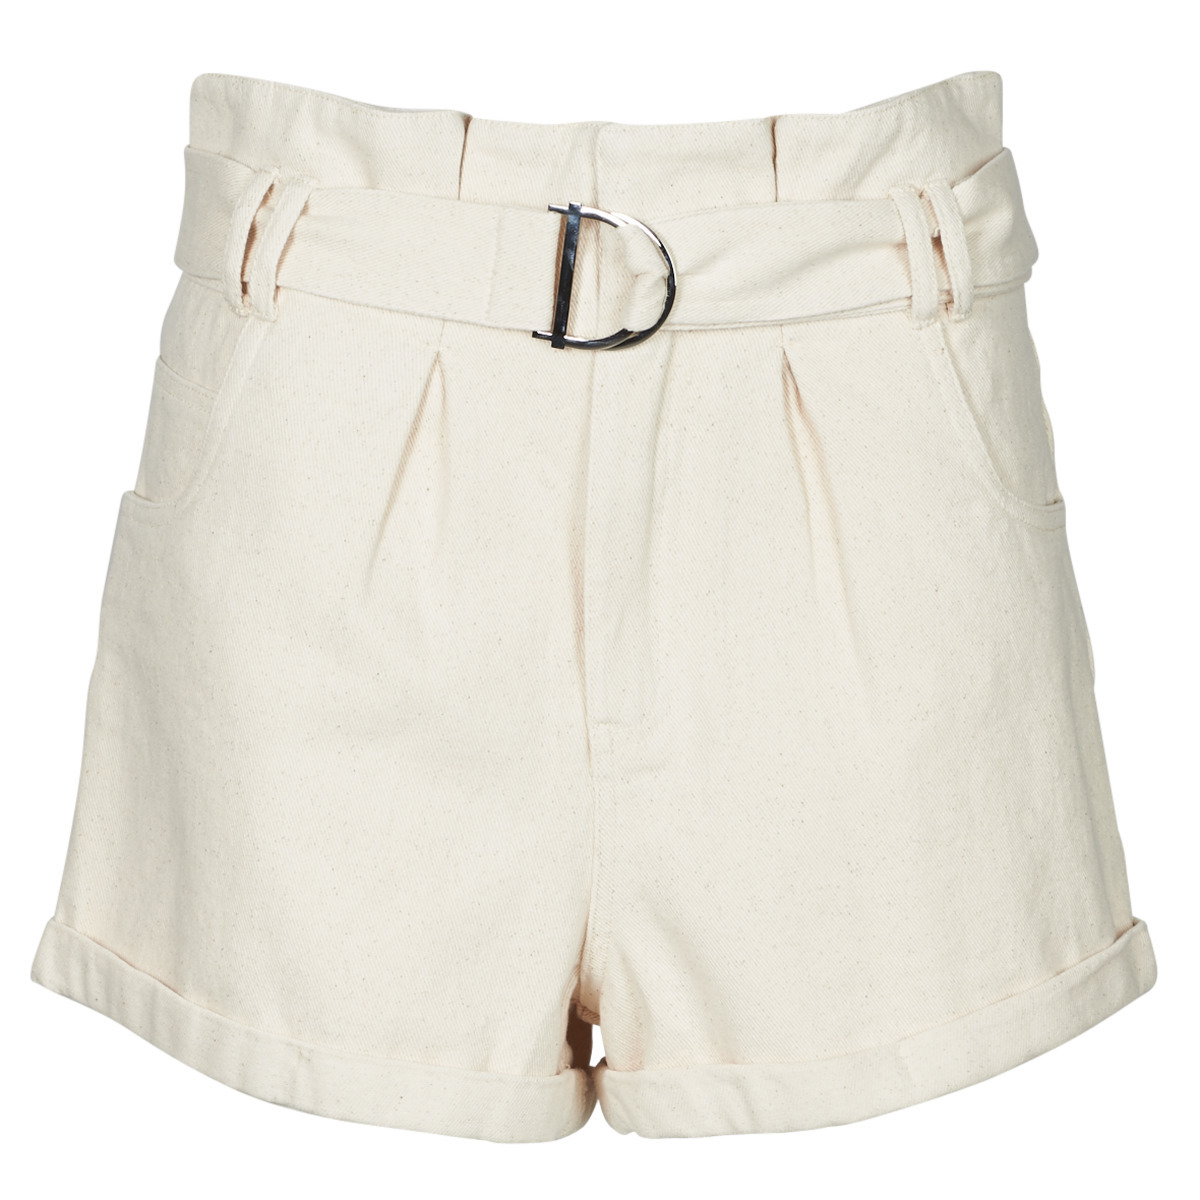 Spartoo - Shorts Beige for Women by Betty London GOOFASH